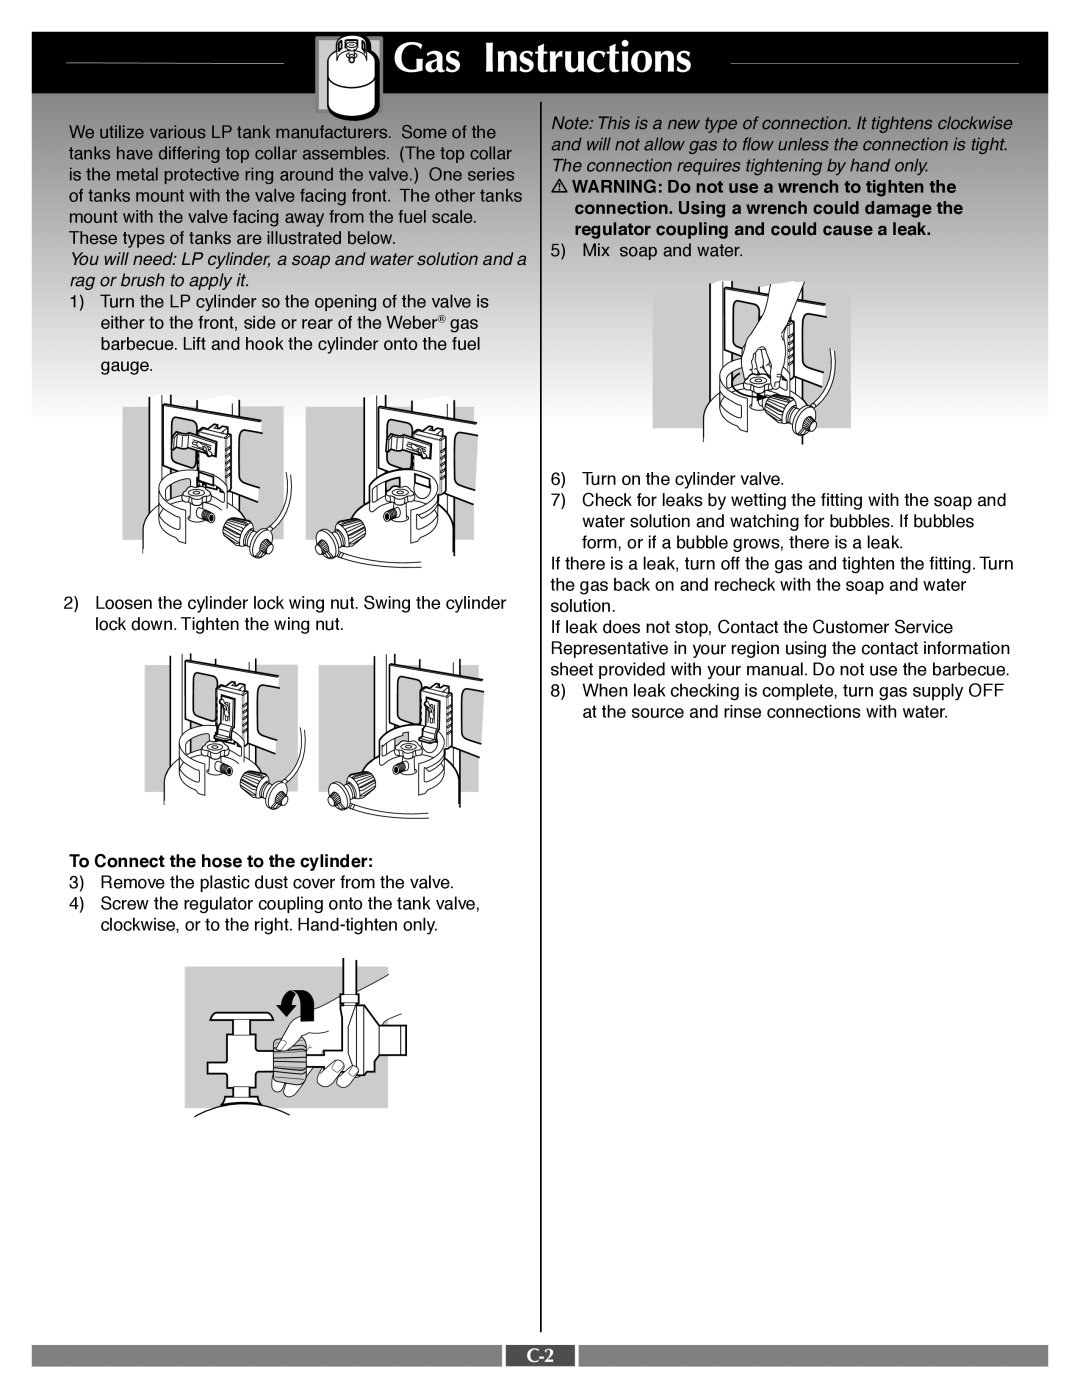 Weber 55545 manual Gas Instructions, CC--2, Note This is a new type of connection. It tightens clockwise 